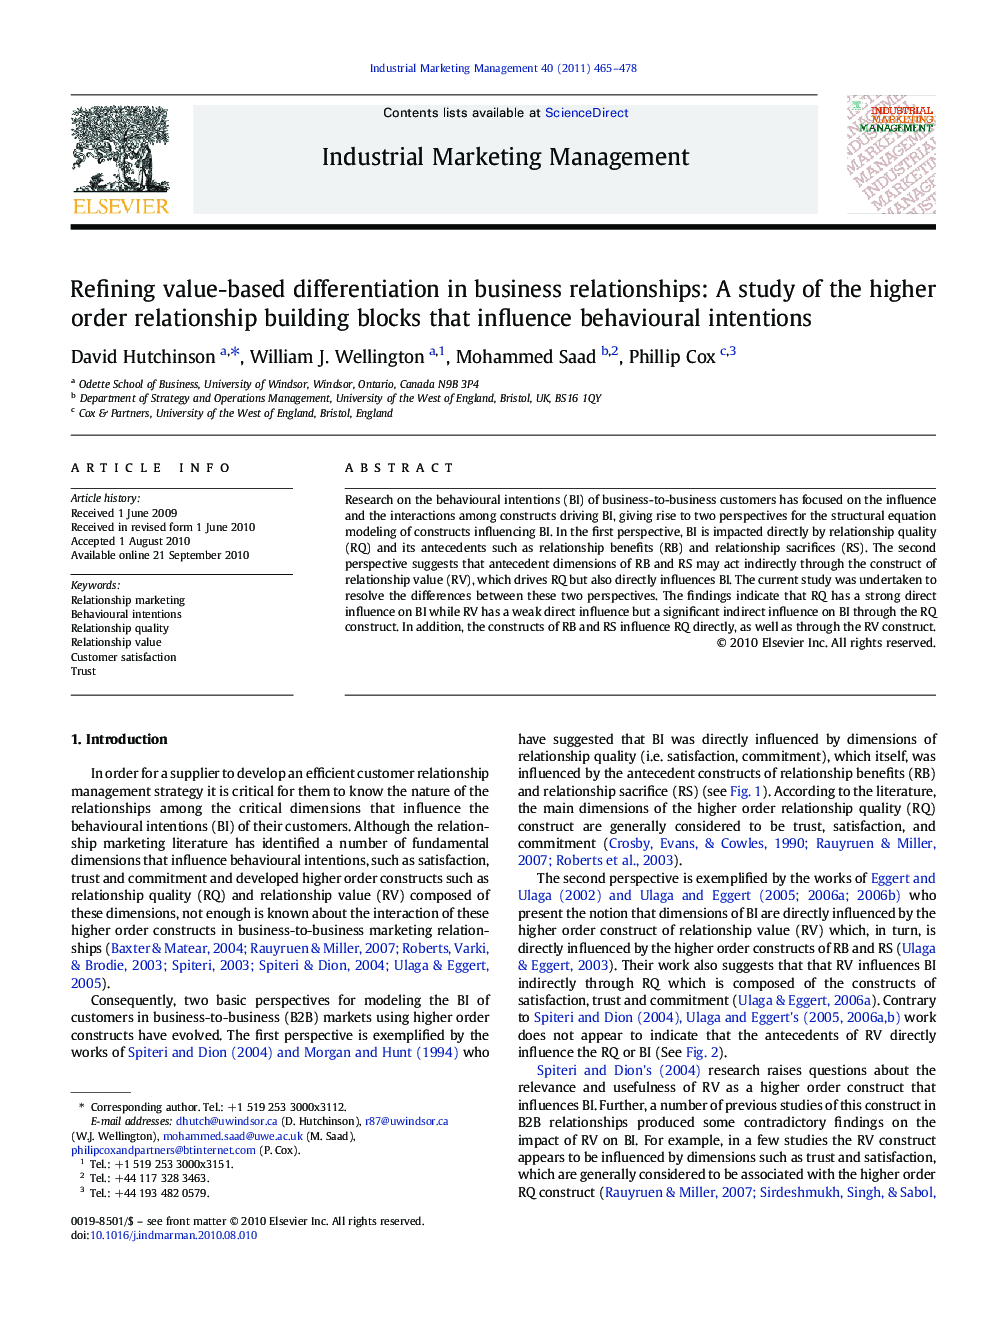 Refining value-based differentiation in business relationships: A study of the higher order relationship building blocks that influence behavioural intentions